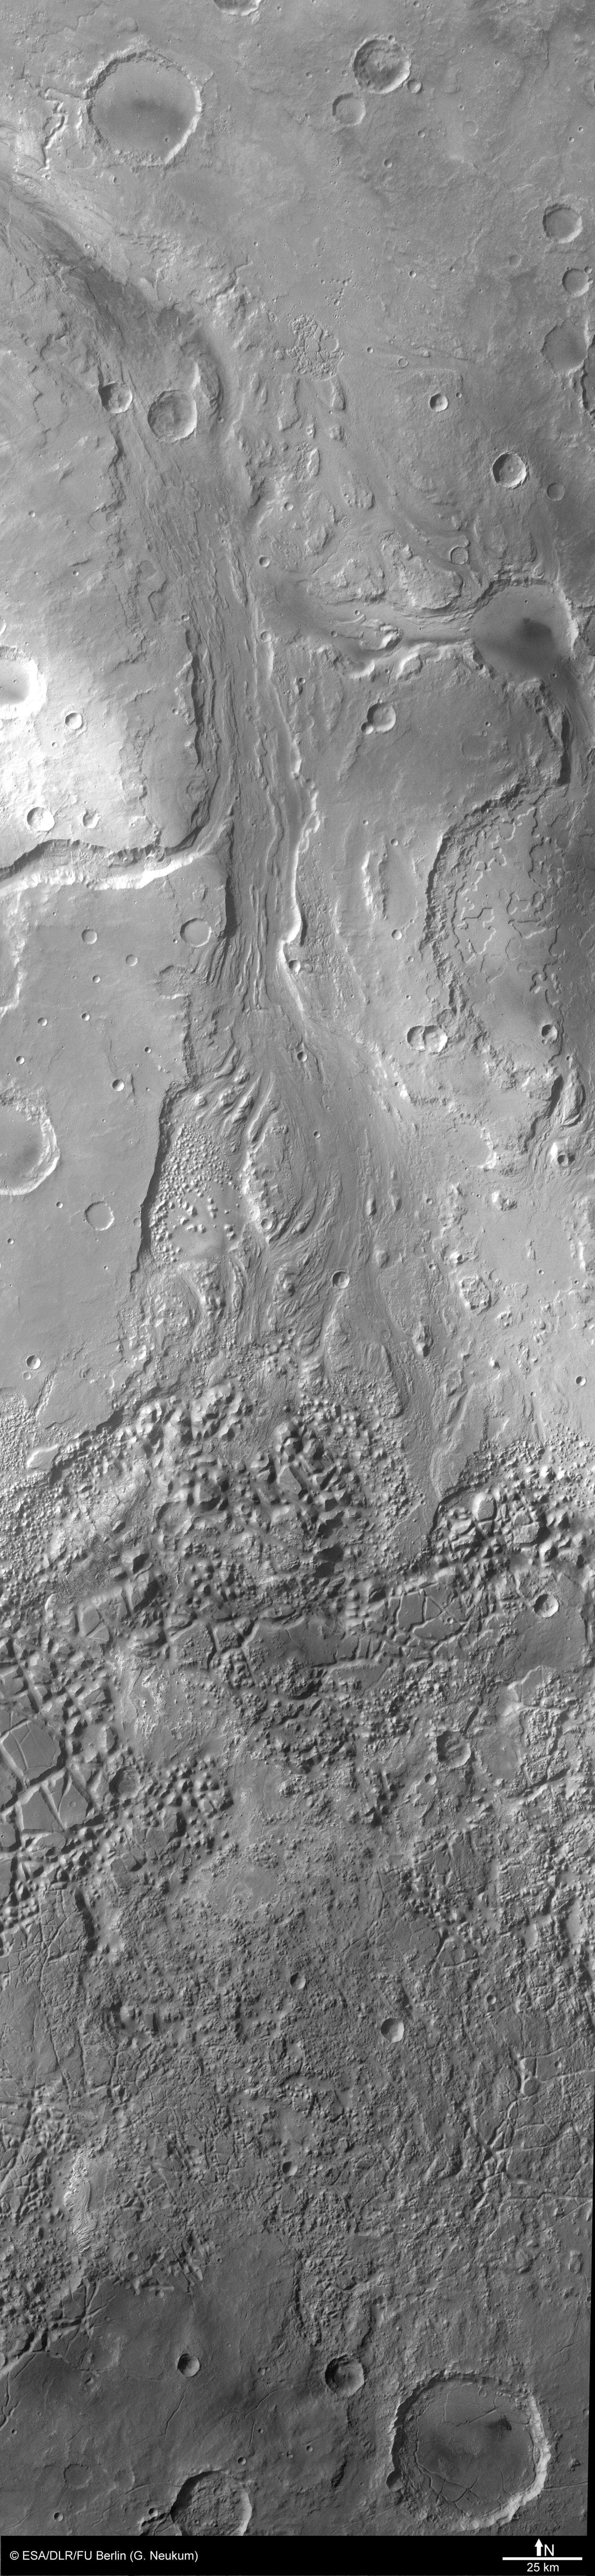 Black and white pan across the region